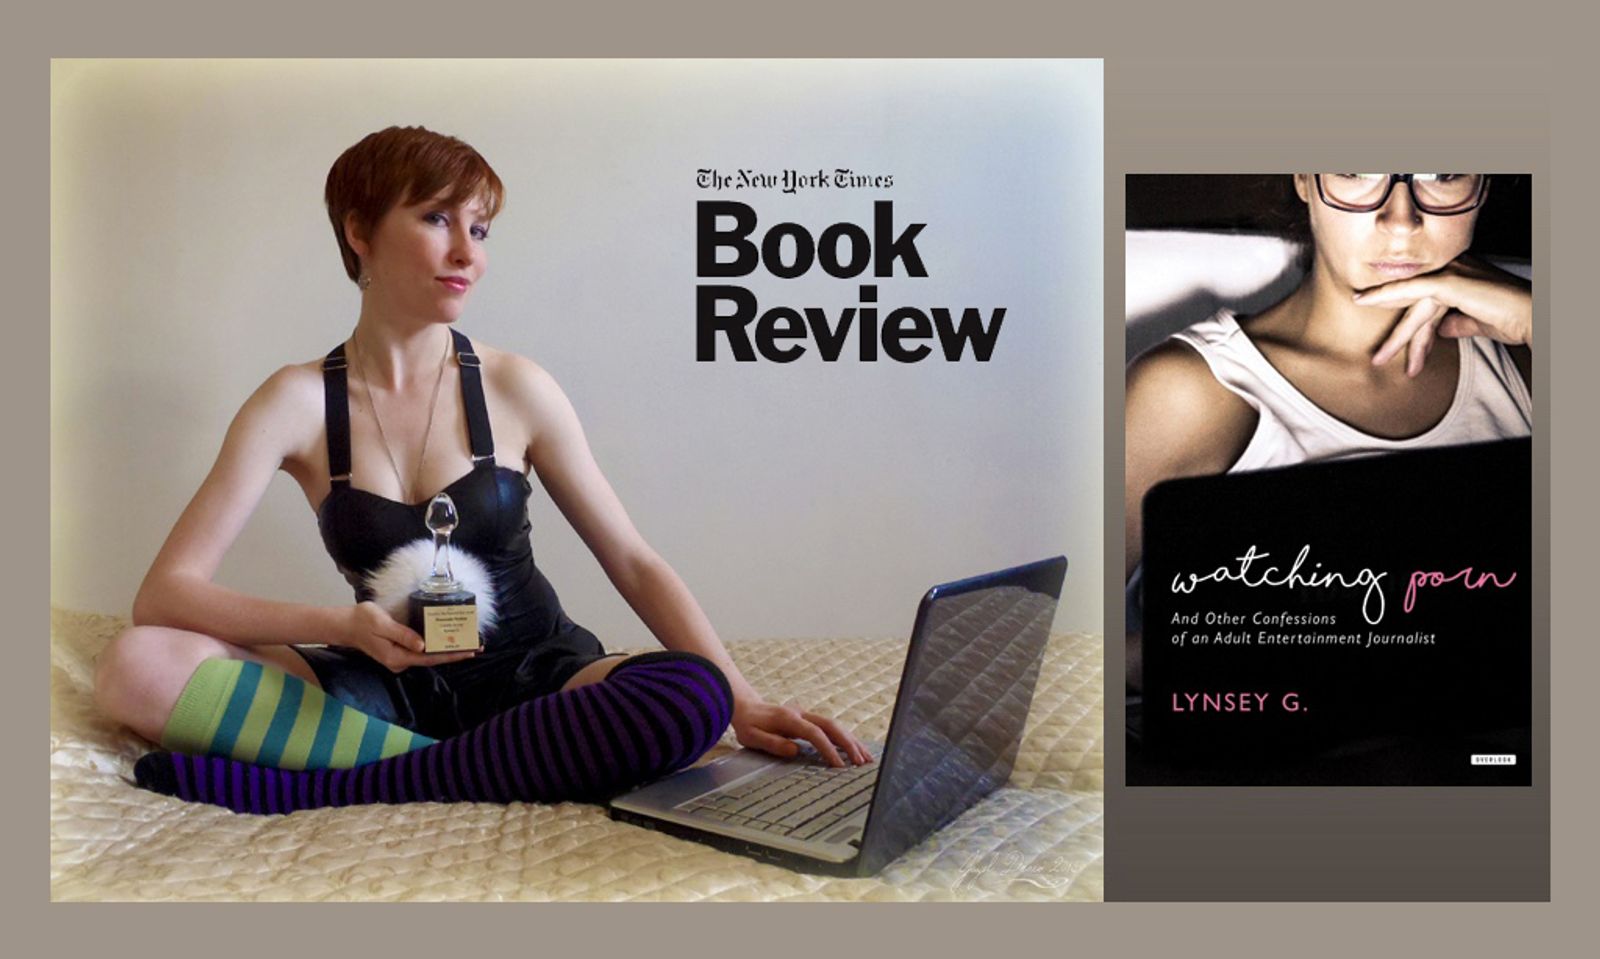 ‘Watching Porn’ Receives Praise From NYT Book Review